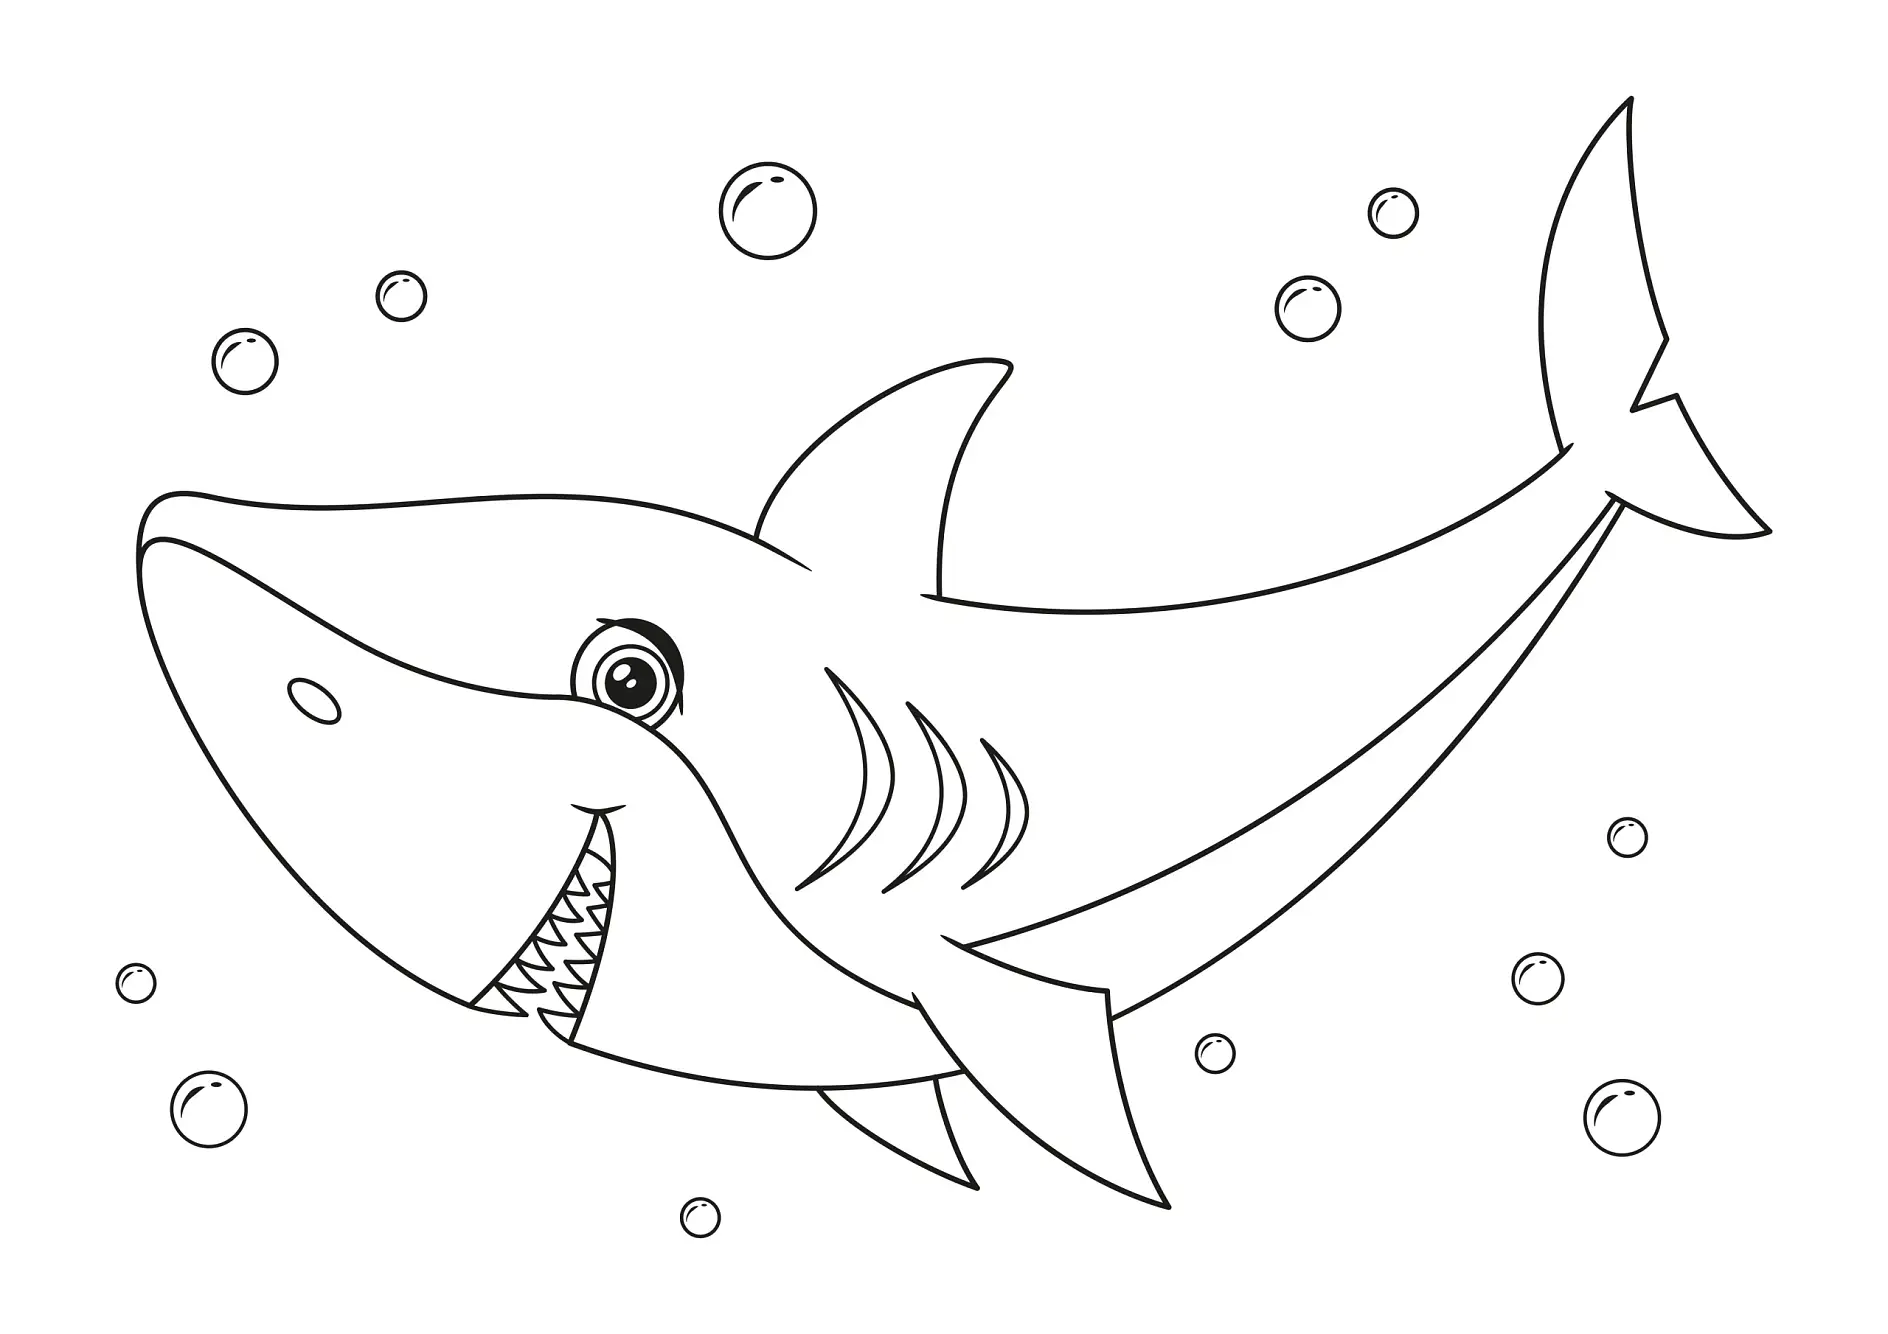 Сute shark swims coloring page